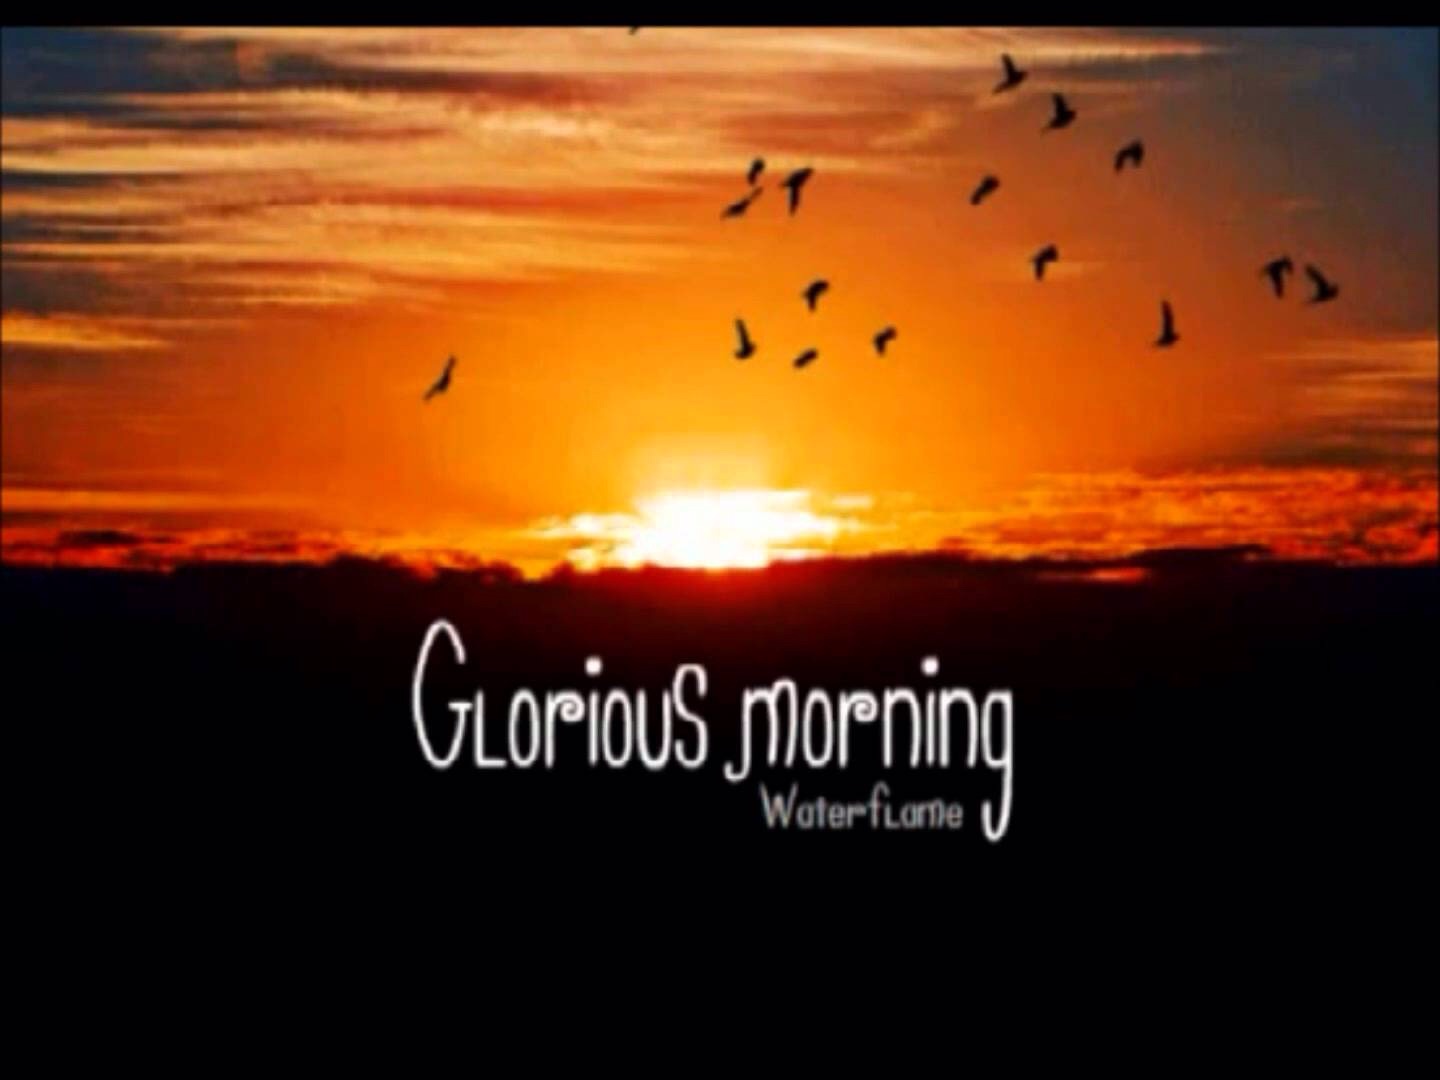 Glorious Morning | Waterflame Wiki | FANDOM powered by Wikia